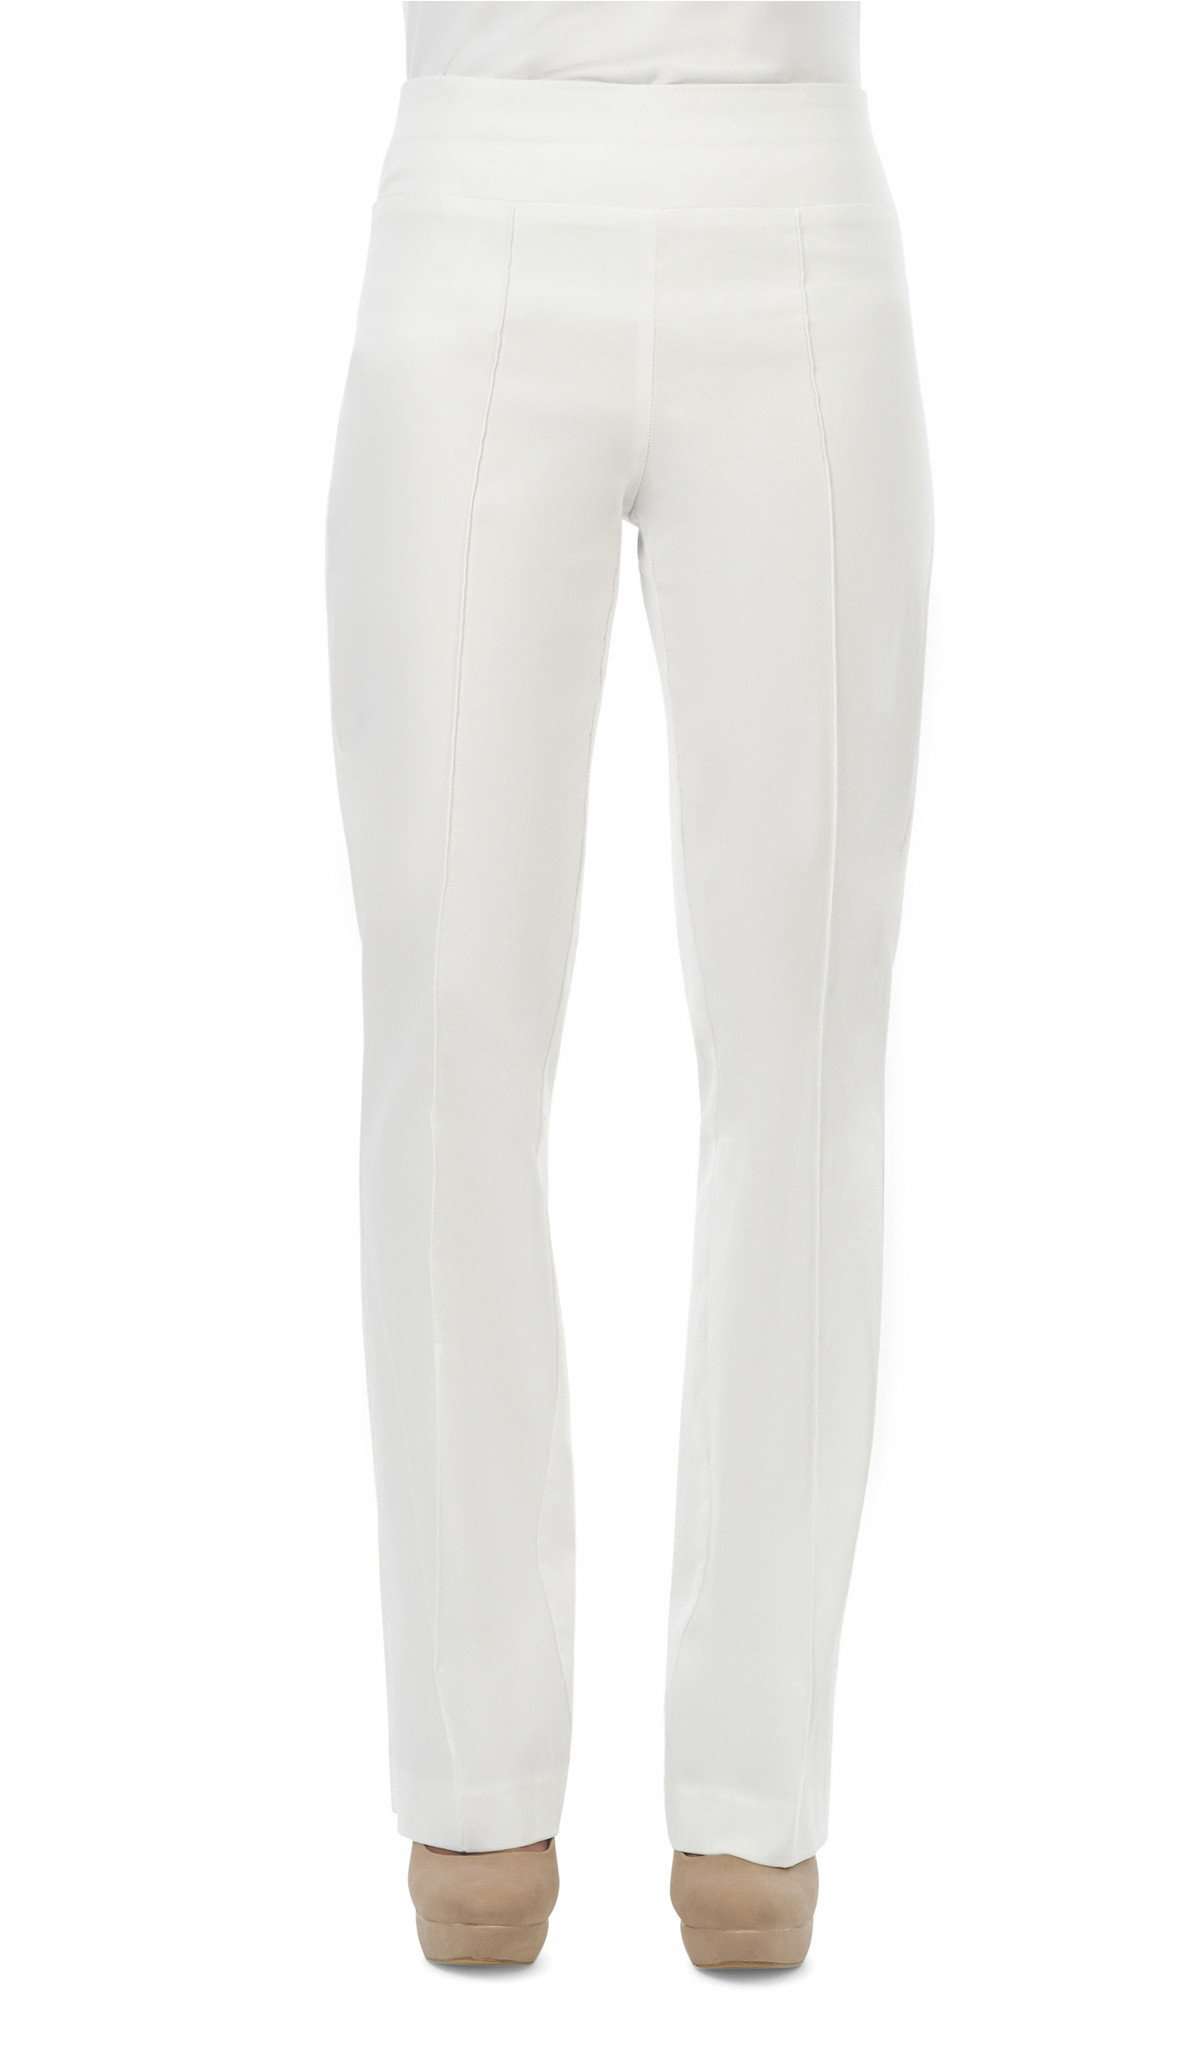 Women's Pants White Stretch Pant Our &quot;Miracle Fit&quot; Quality Stretch Fabric Made in Canada Yvonne Marie - Yvonne Marie - Yvonne Marie